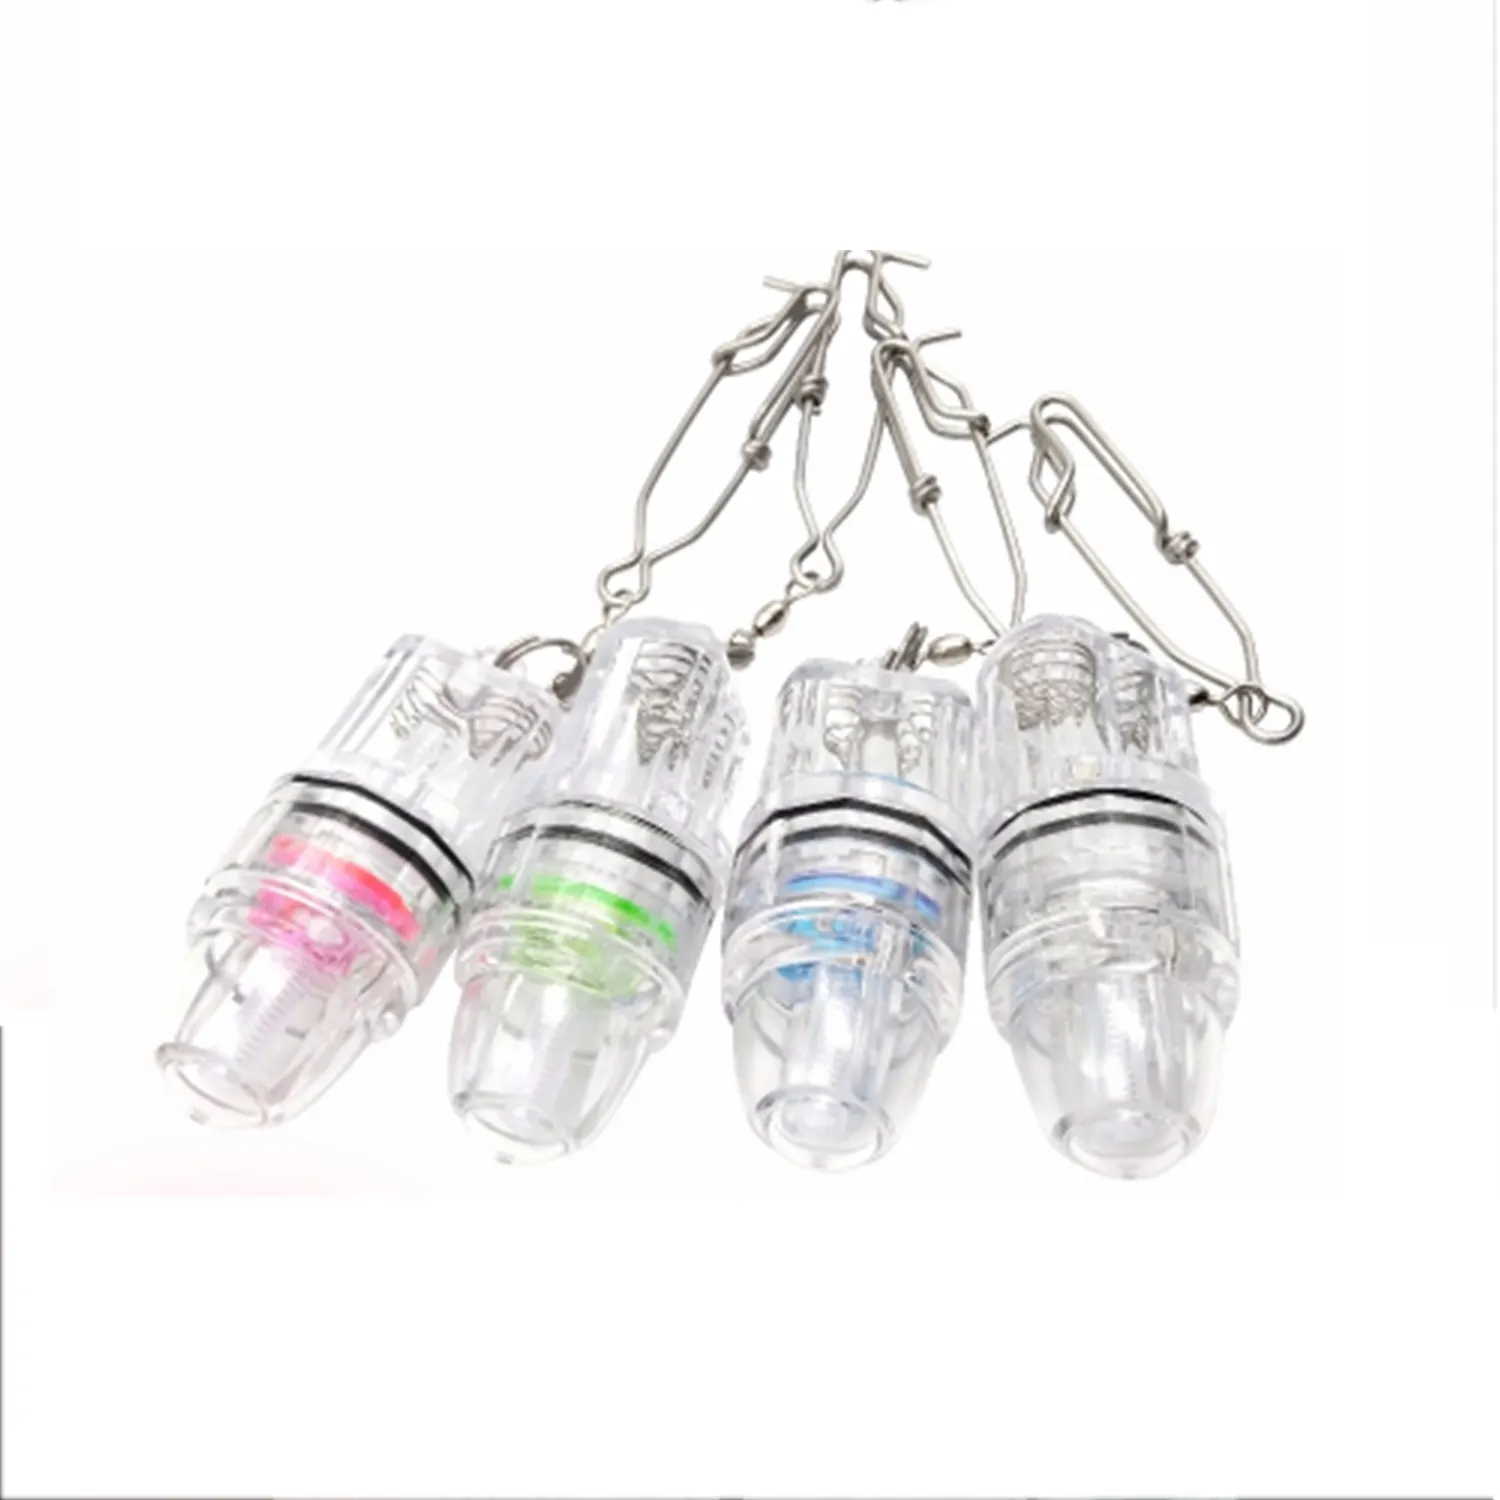 Deep Drop Fishing Light LED Underwater Fish Lure Bass Attractive Light Boat Night Fishing Lure Light 4 Colors